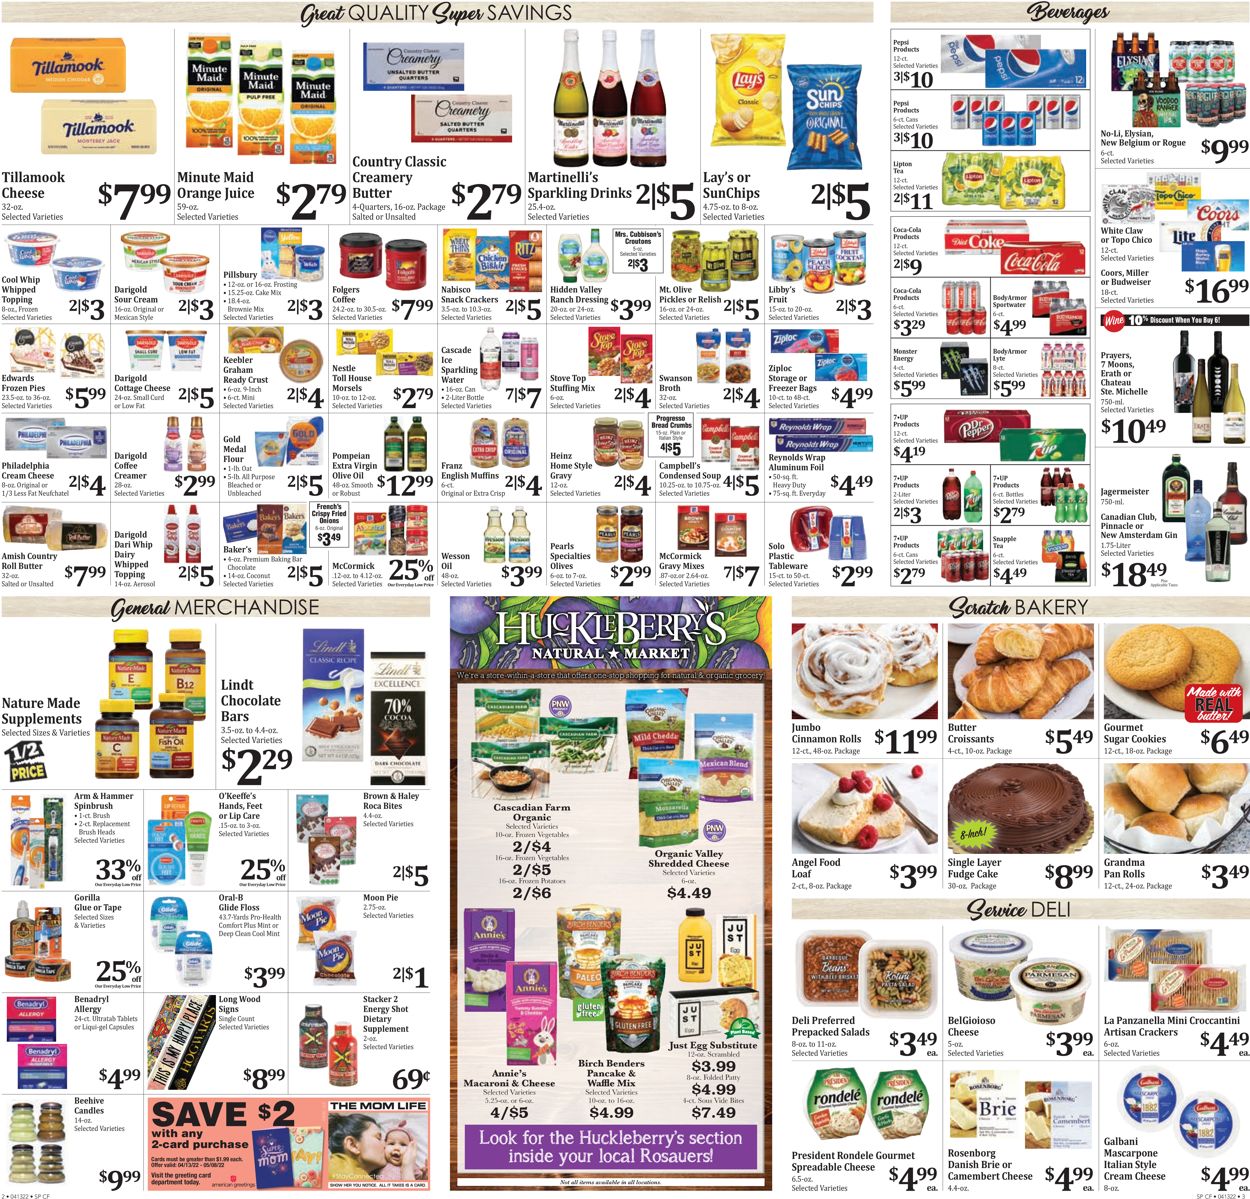 Rosauers EASTER AD 2022 Weekly Ad Circular - valid 04/13-04/19/2022 (Page 2)